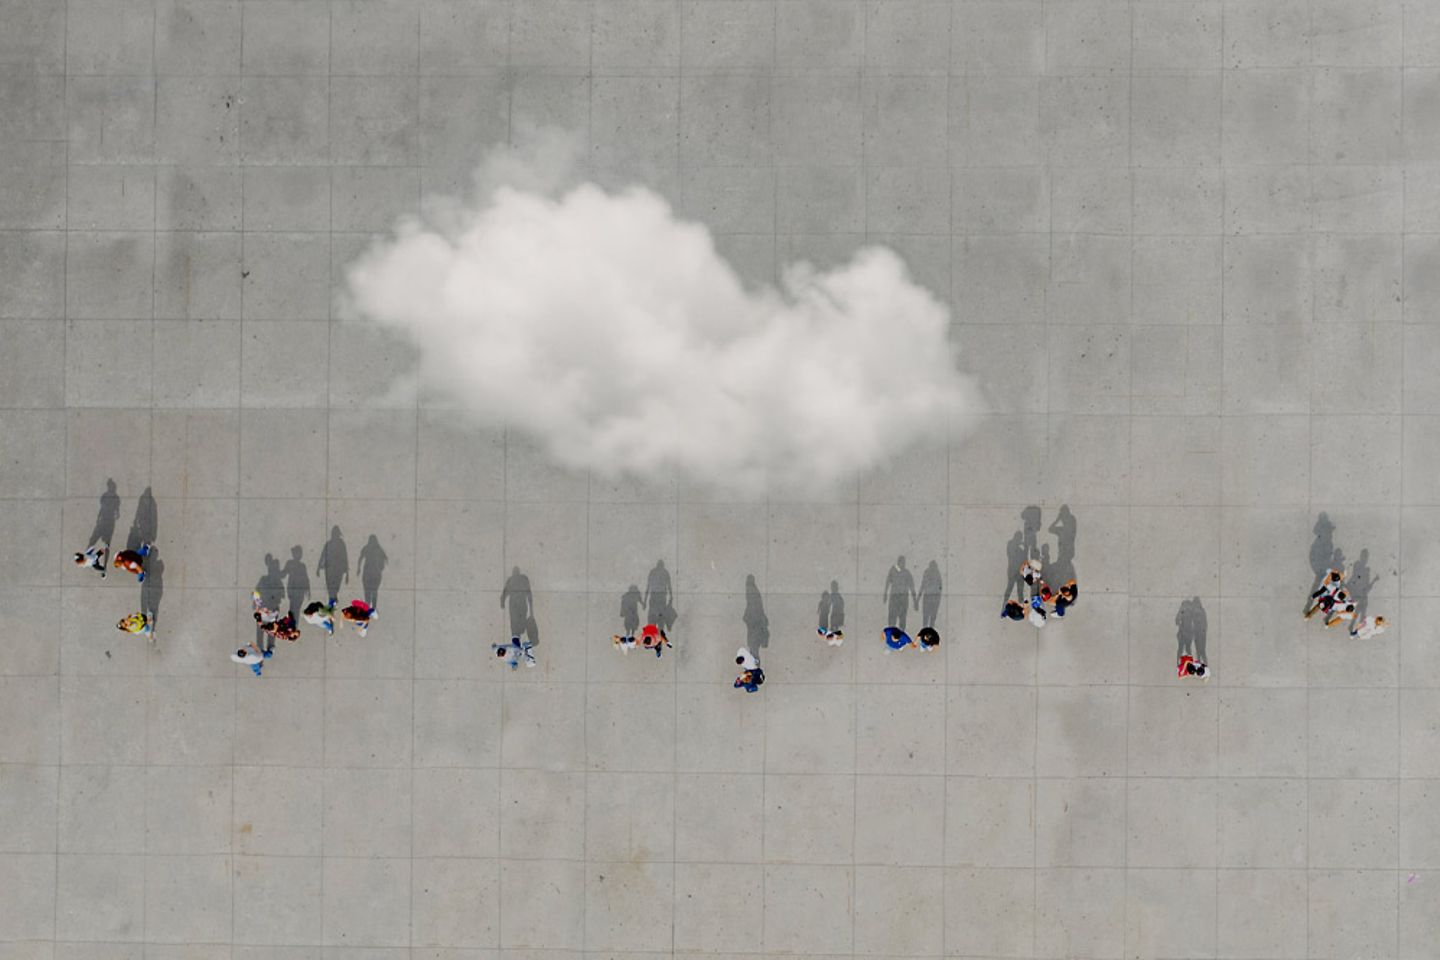  aerial view of crowd with a cloud